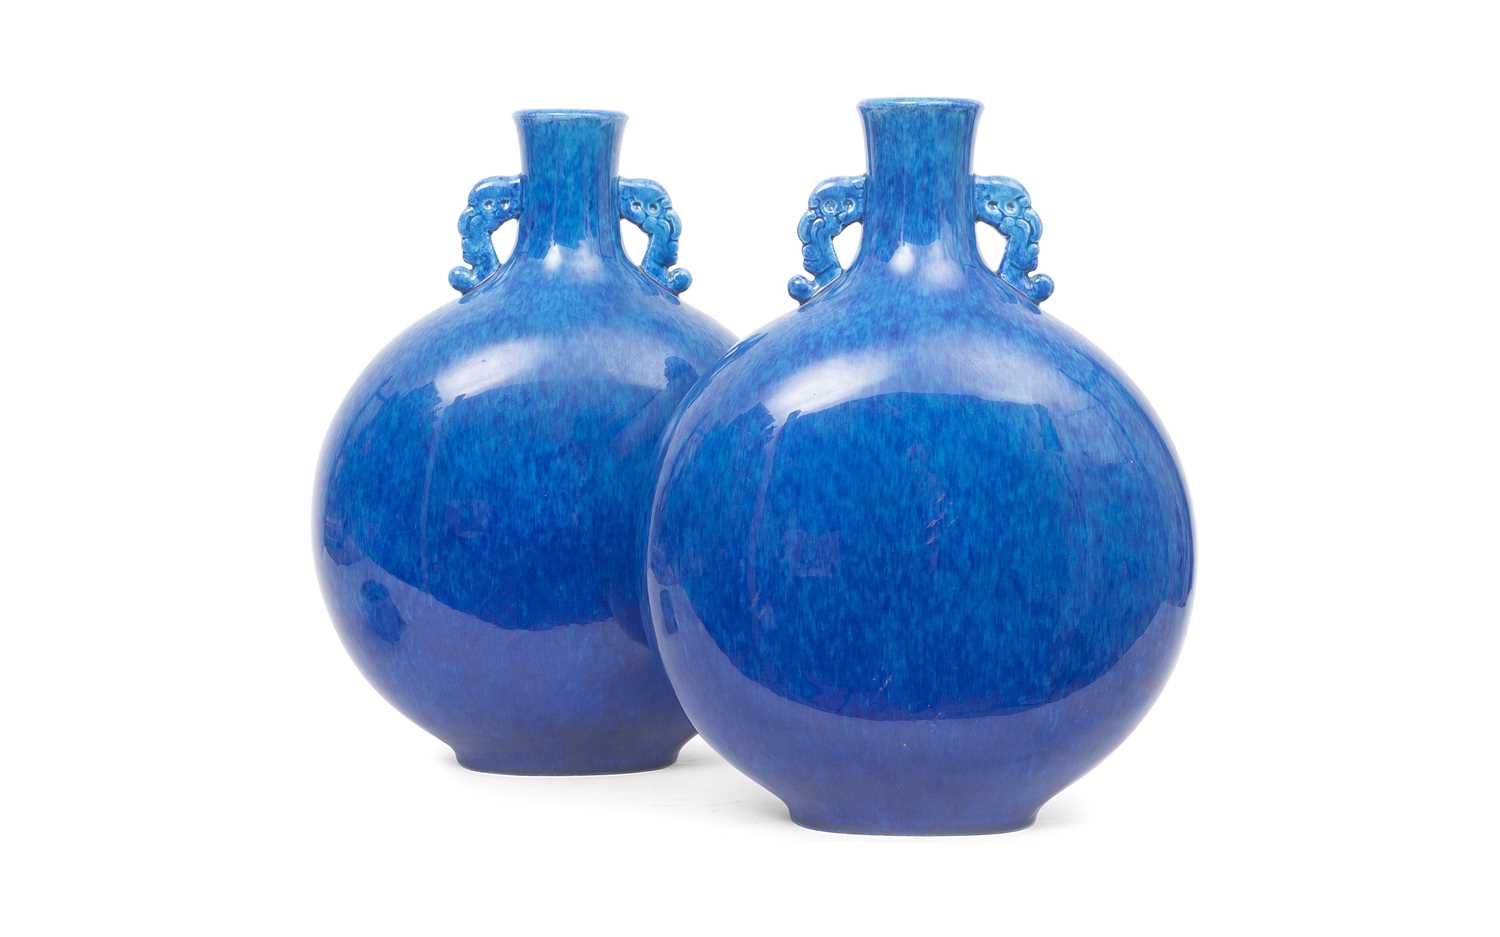 A LARGE PAIR OF 19TH CENTURY SEVRES PORCELAIN MOON FLASK VASES BY PAUL MILET - Image 2 of 4